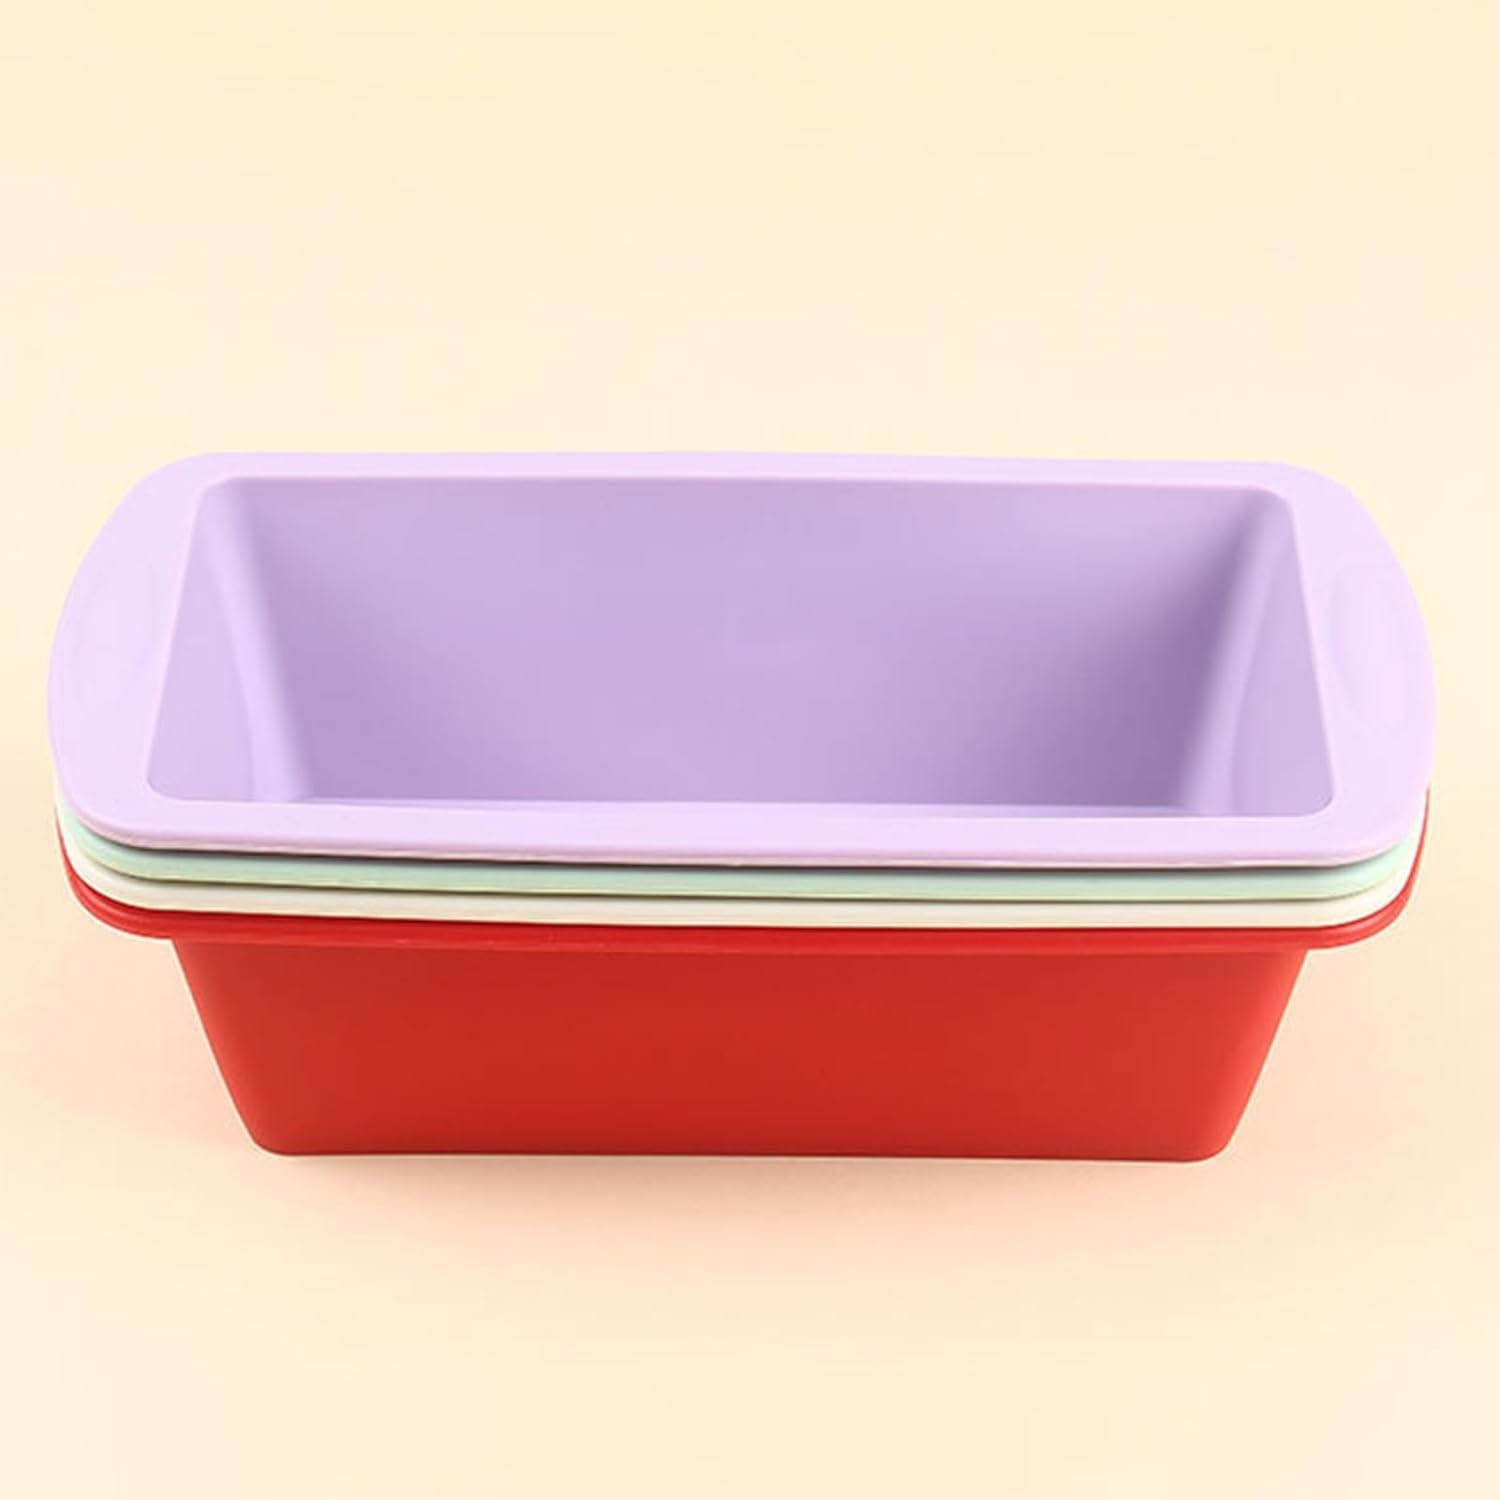 Long Loaf Cake Mold Silicone Baking Mold Nonstick Silicone Bread Loaf Pan with Handles Oven Safe Easy Release Heat-Resistant Light Purple  fxwtich   